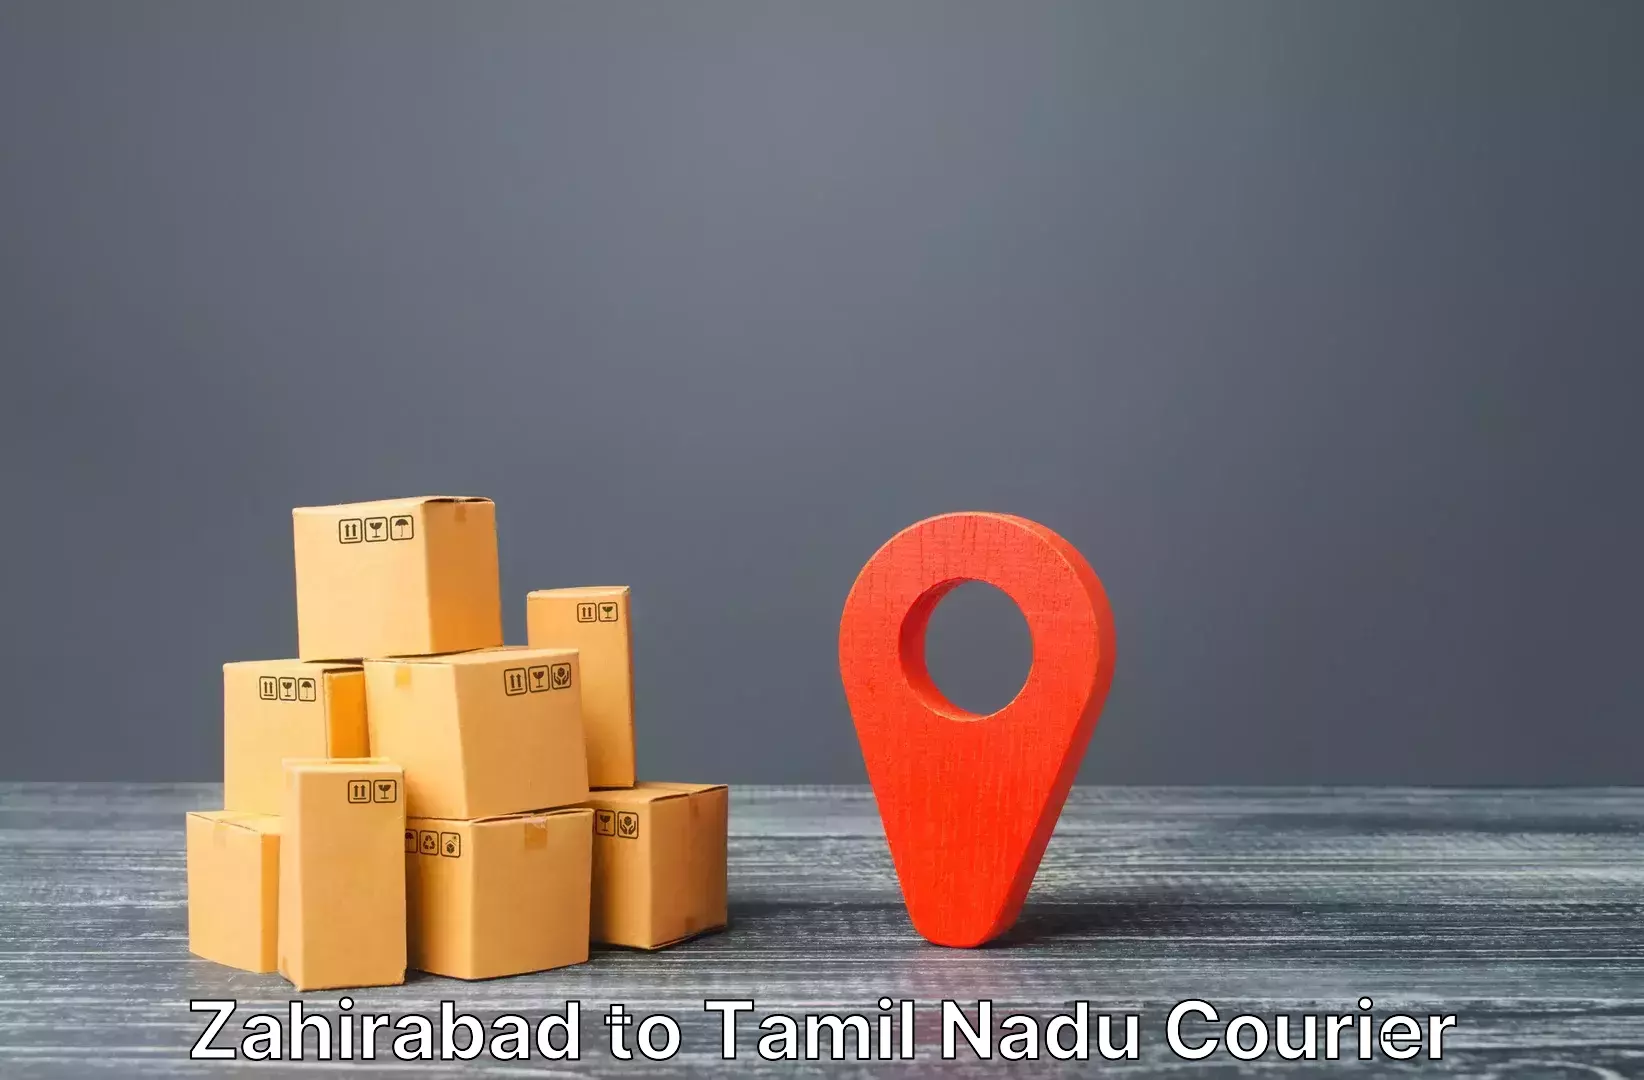 Luggage storage and delivery in Zahirabad to Tamil Nadu